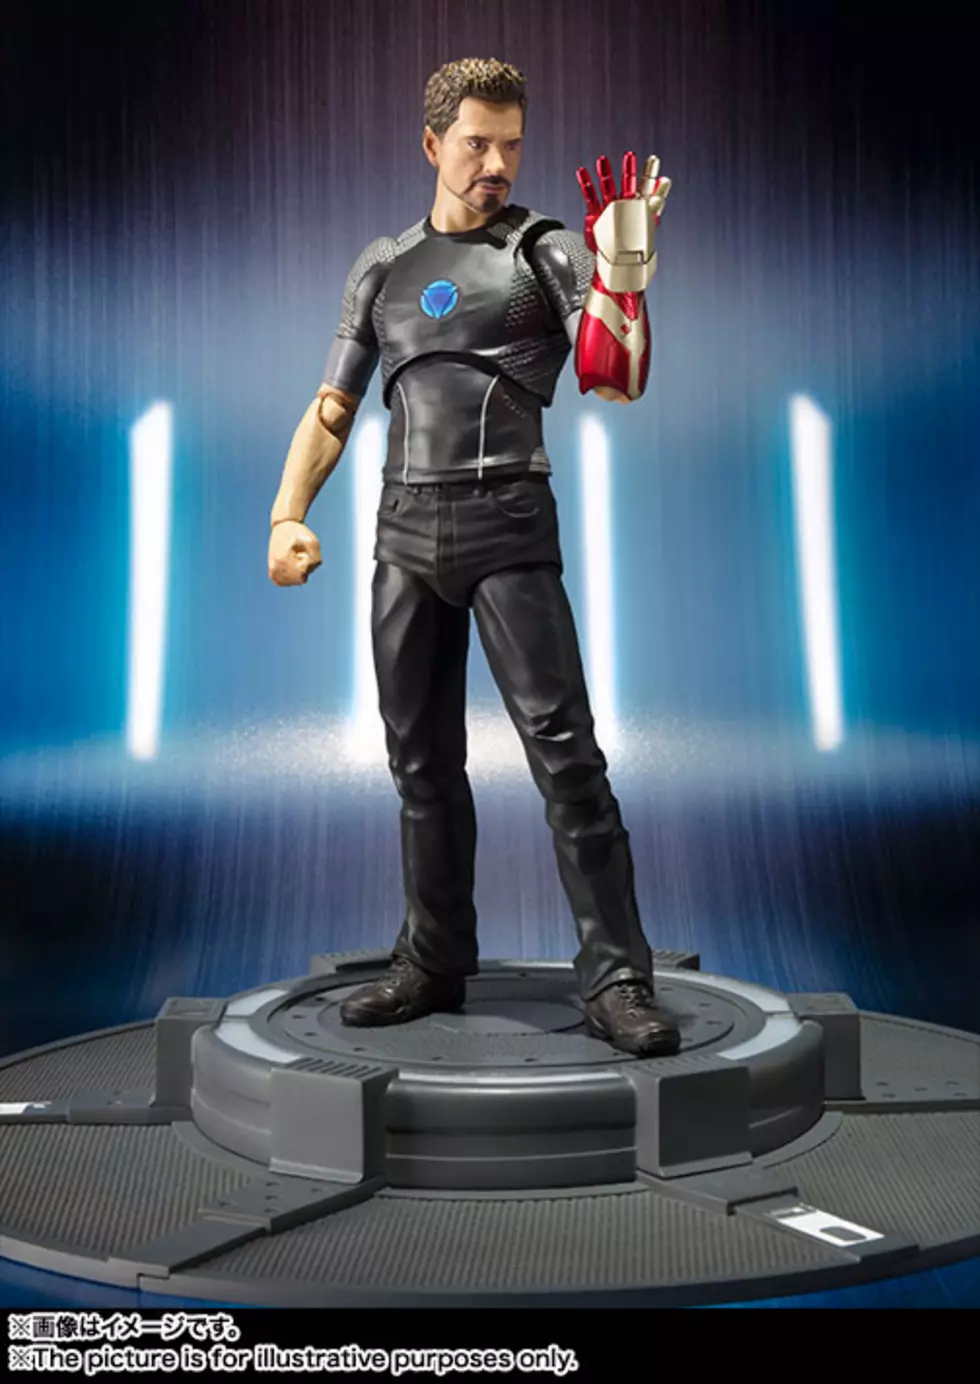 Figuarts Heads Back to the Testing Lab With Tony Stark